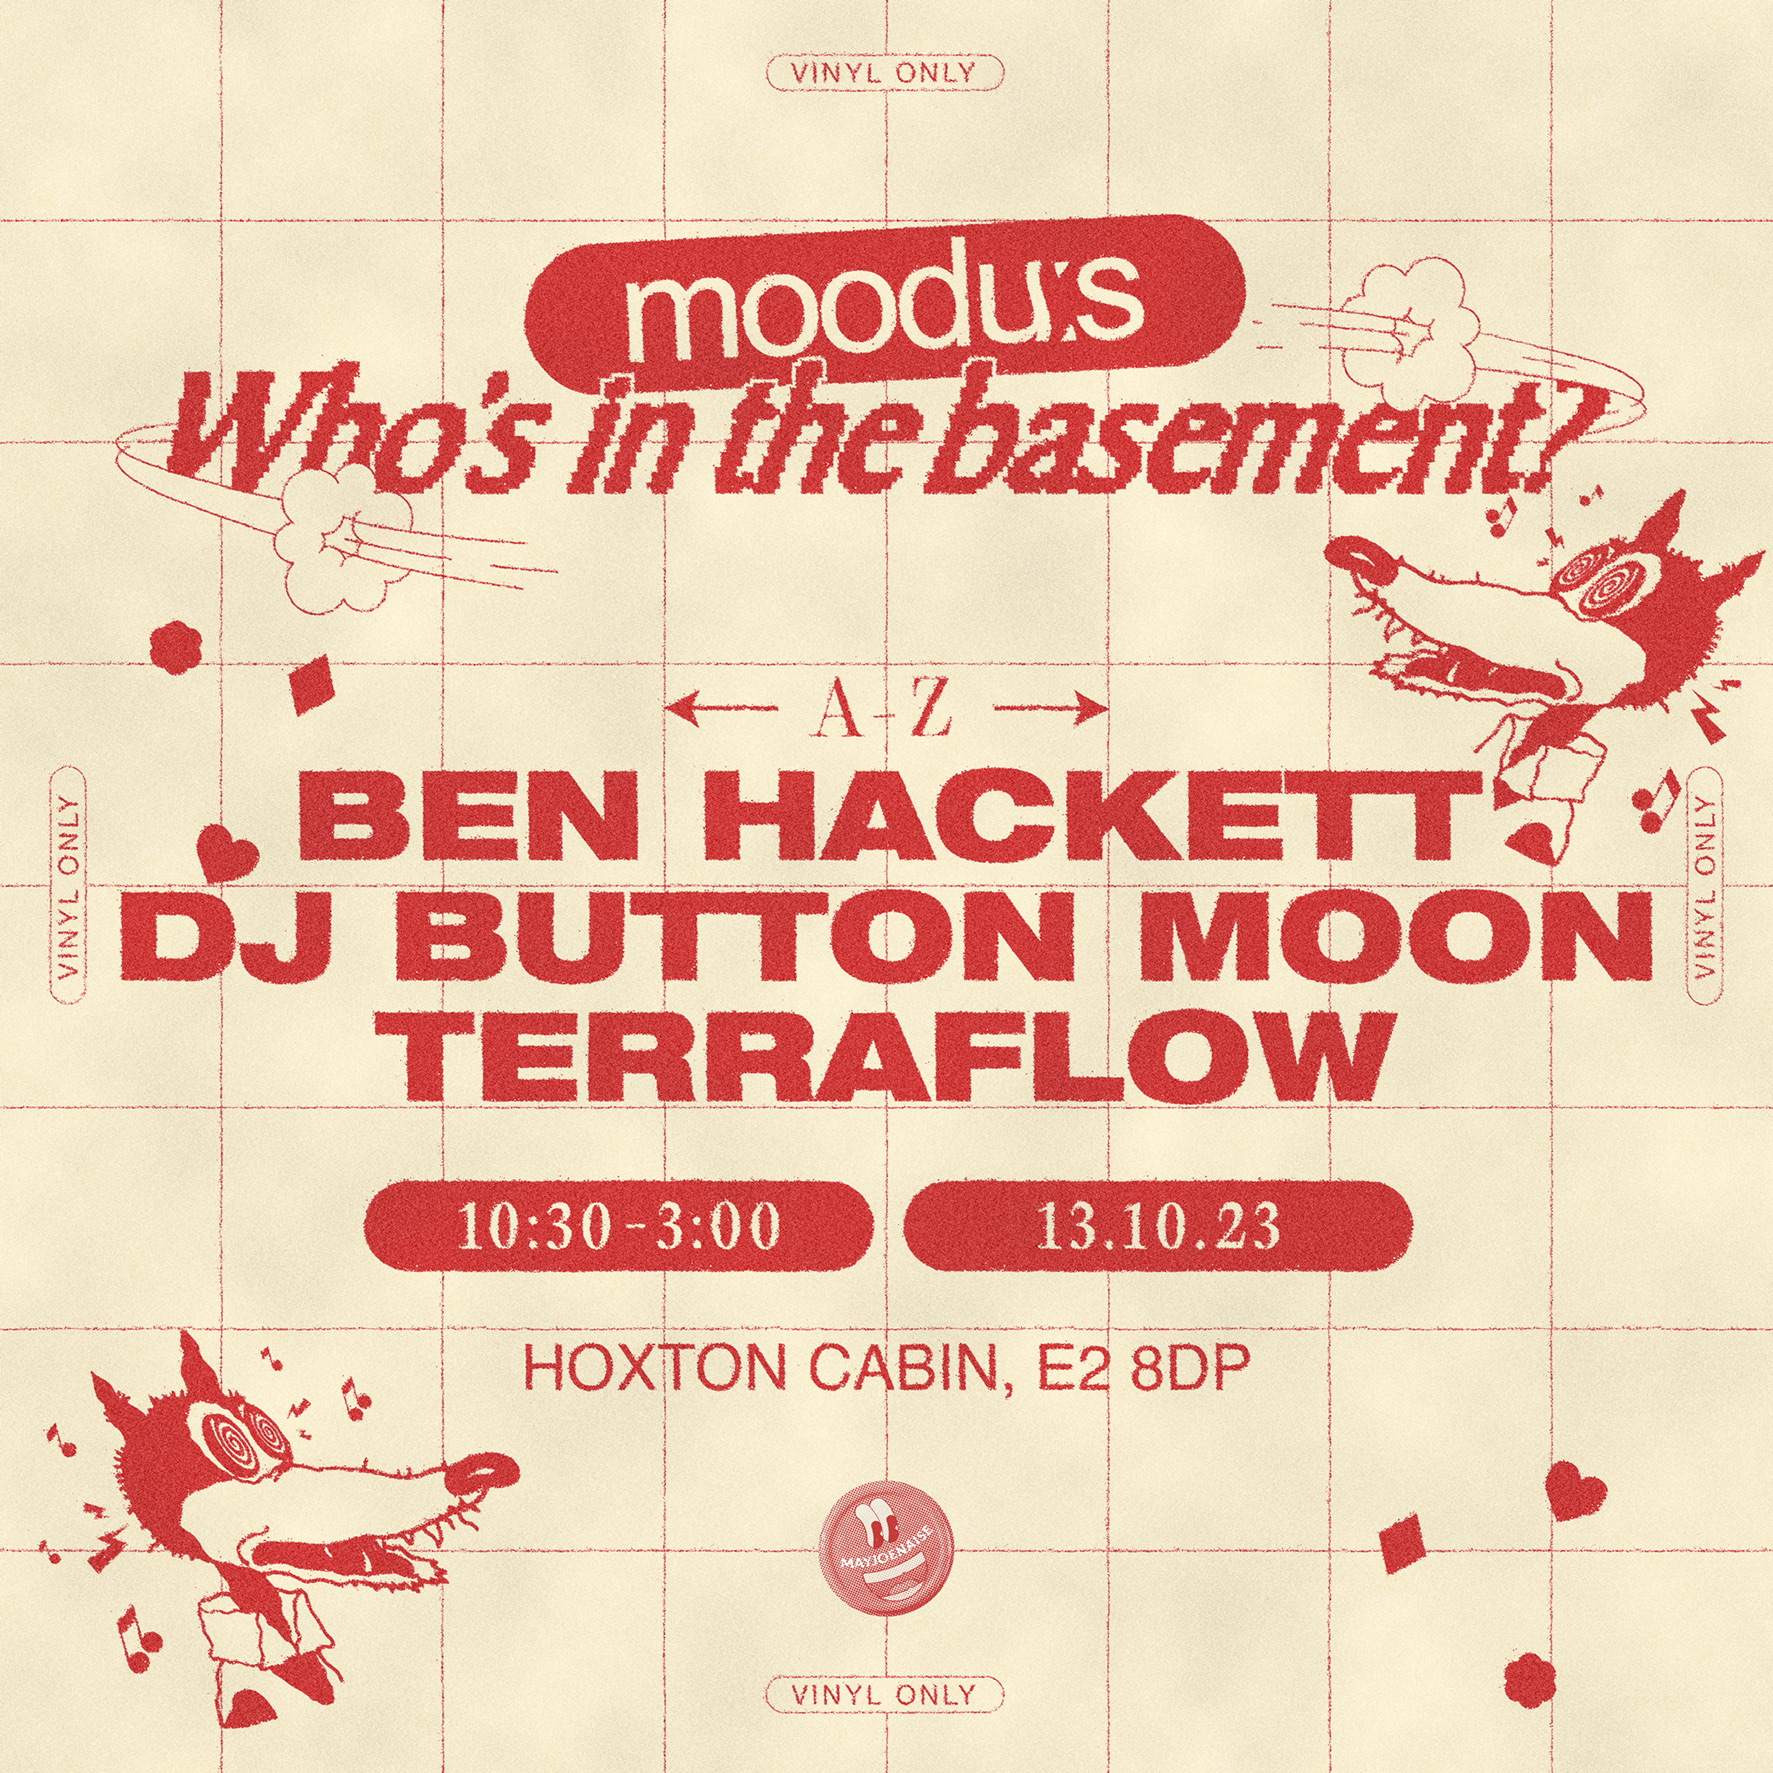 moodus: Who's in the Basement - Página frontal